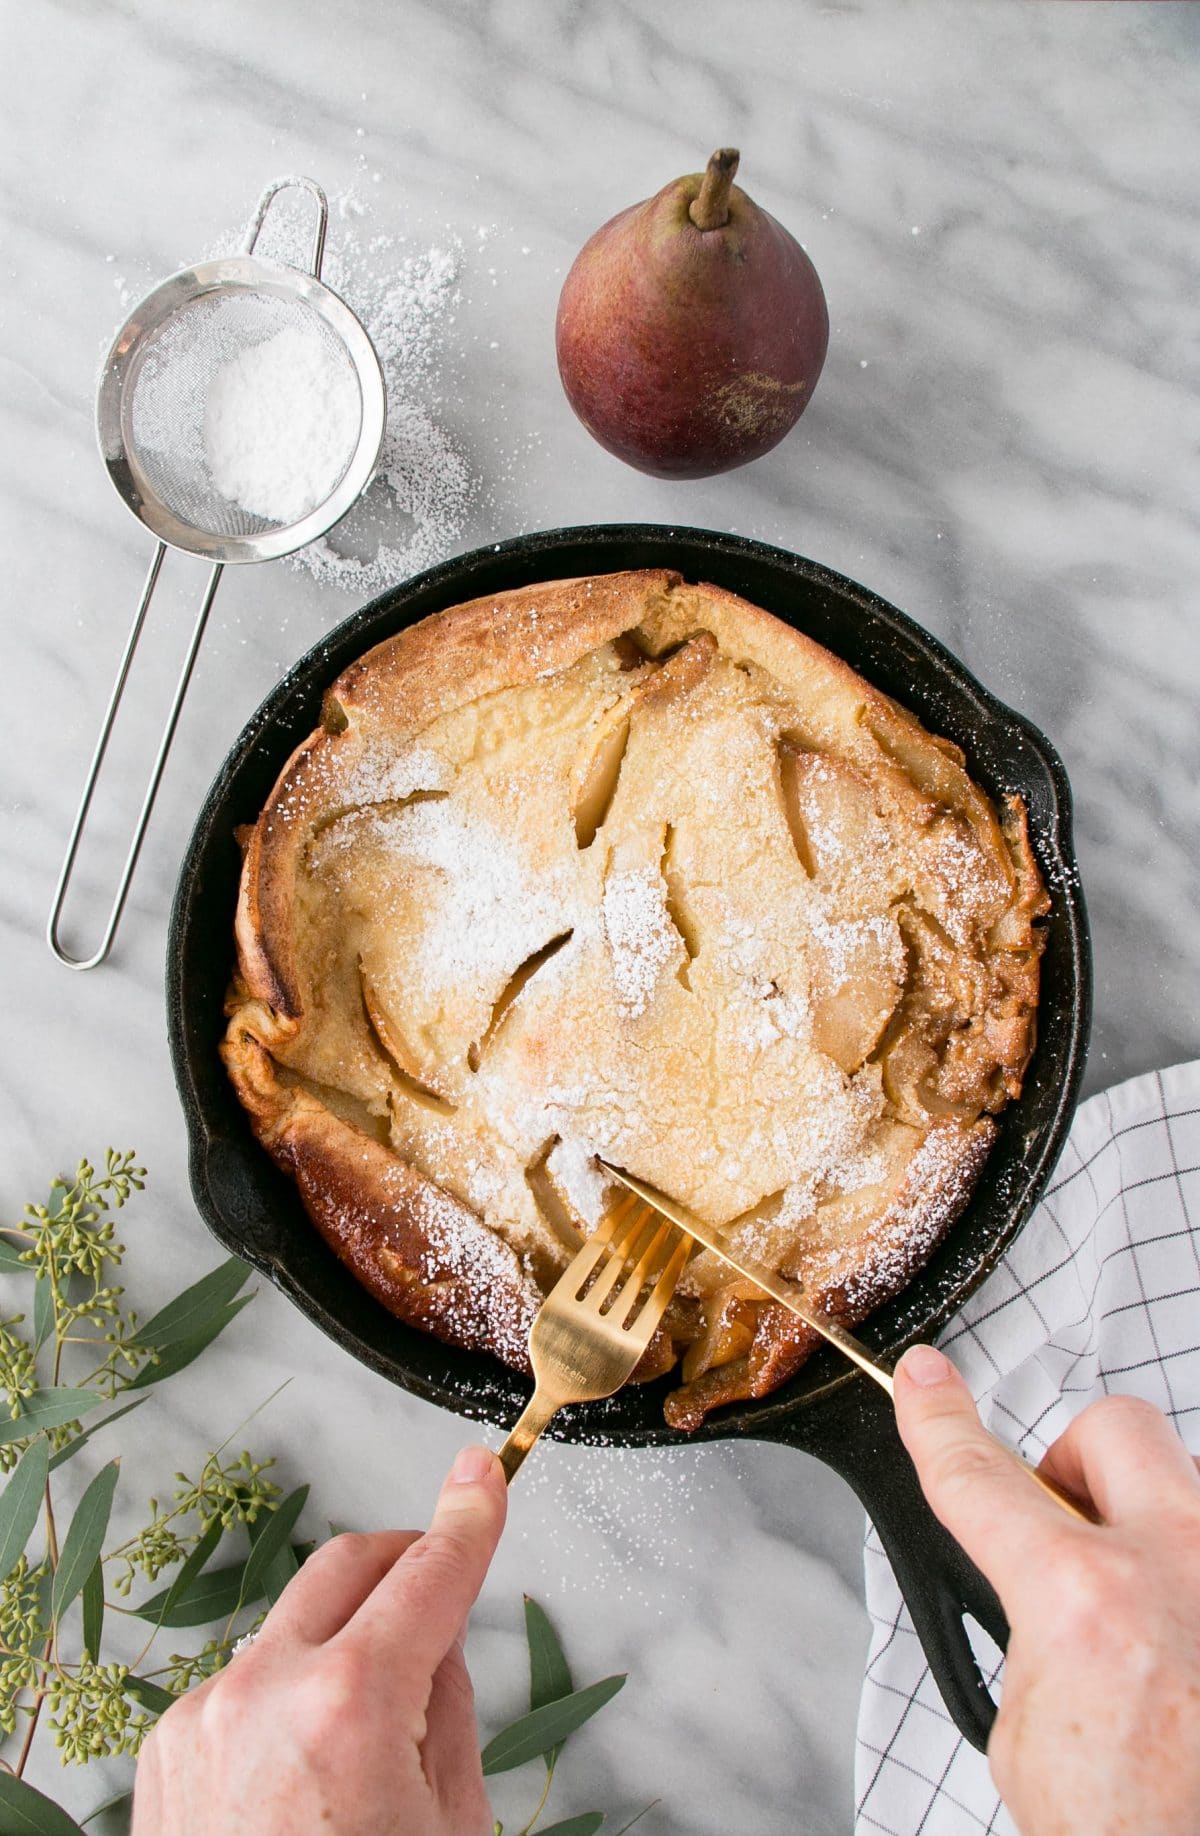 Vanilla Bourbon Pear Baby Dutch Pancake is a dreamy brunch dish. Light and fluffy pancake with layers of vanilla and pear flavouring.